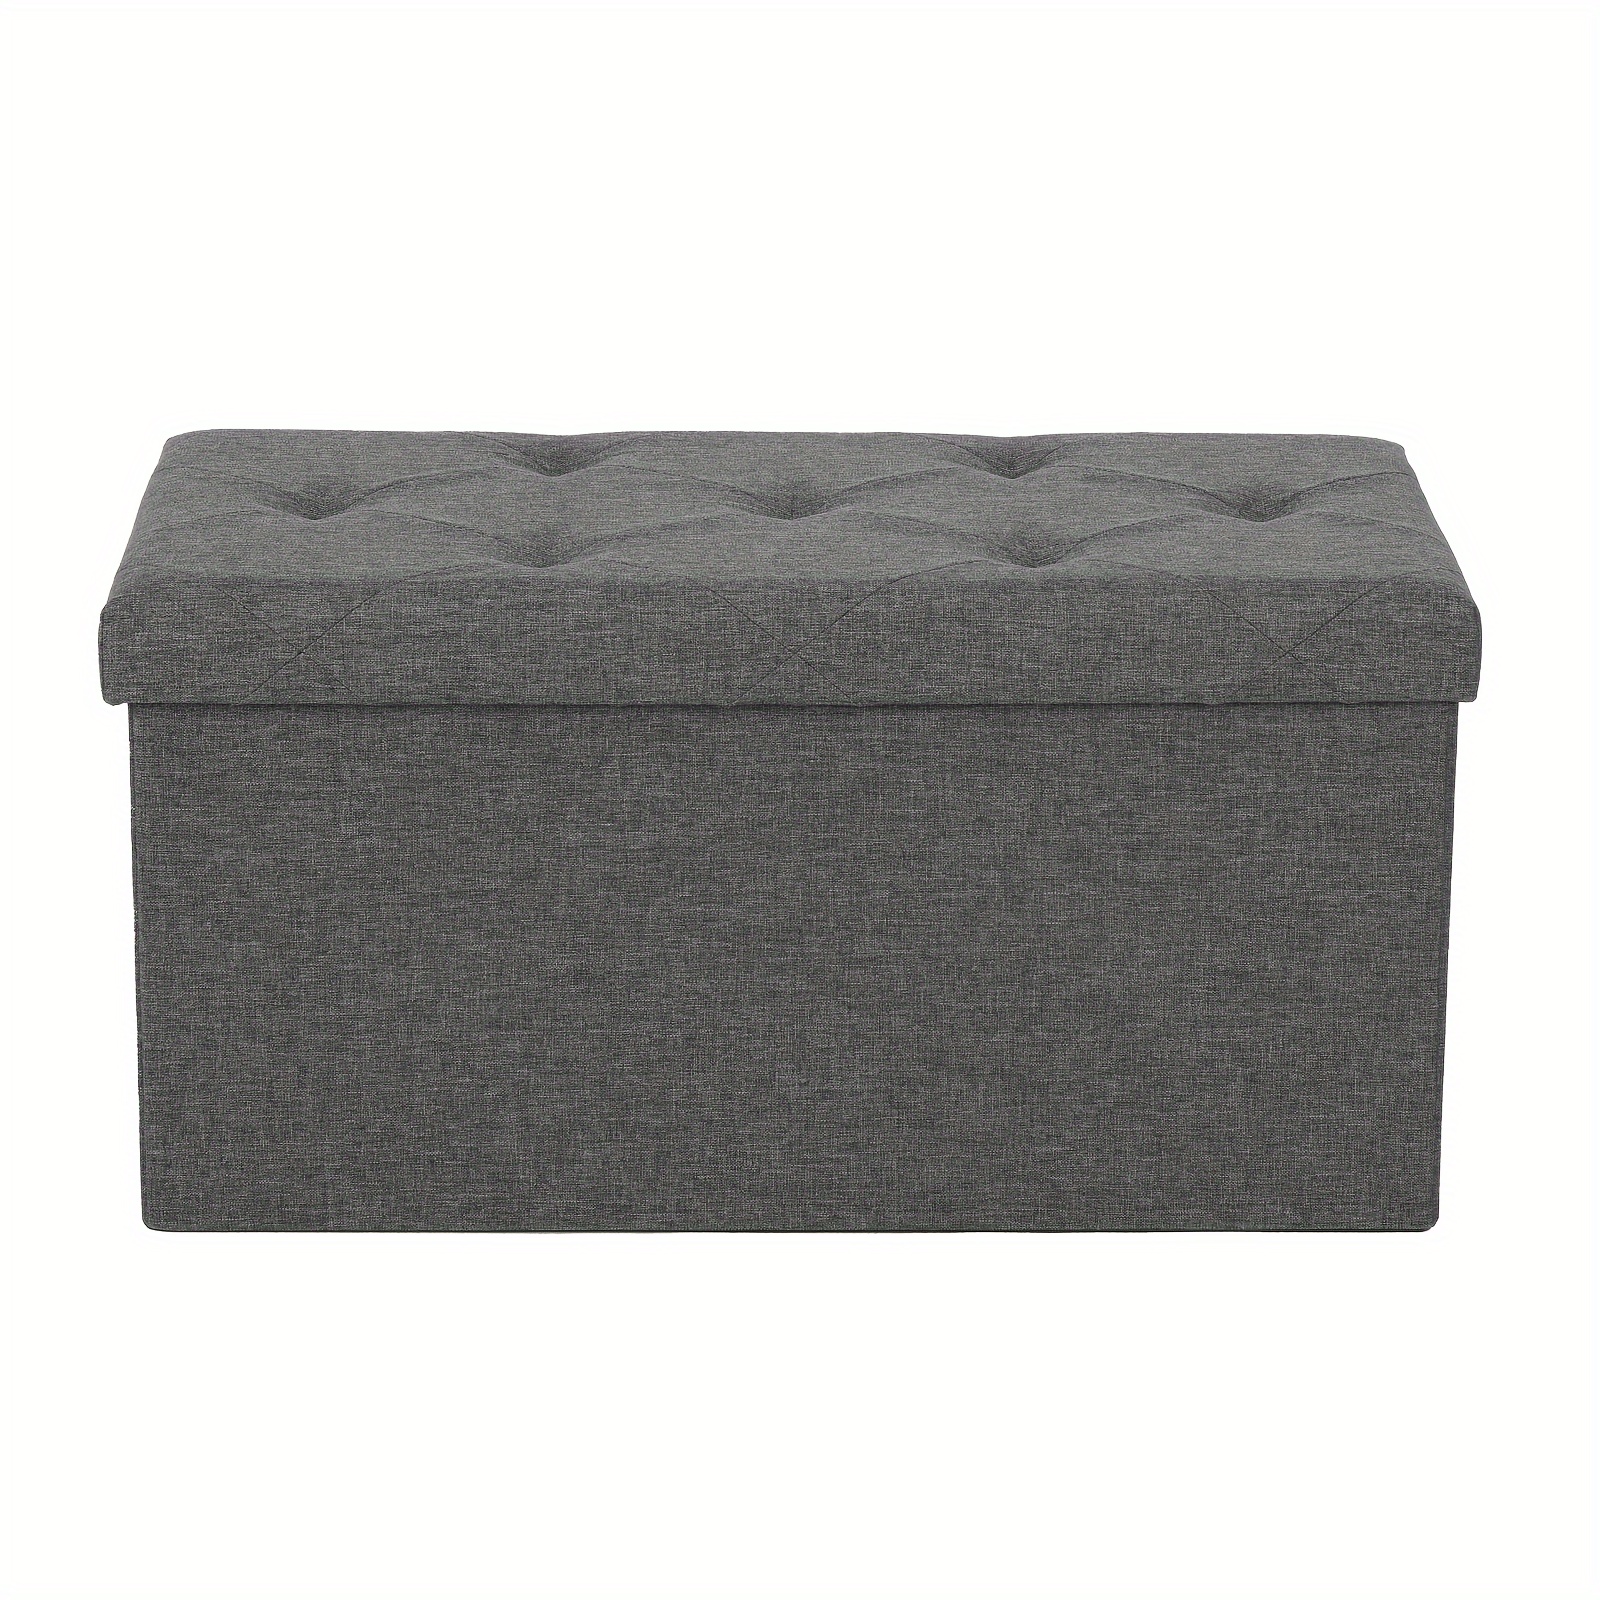 

Folding Storage Ottoman Bench – 43 Inch, Tufted Fabric Footrest With 660 Lbs Capacity, Grey